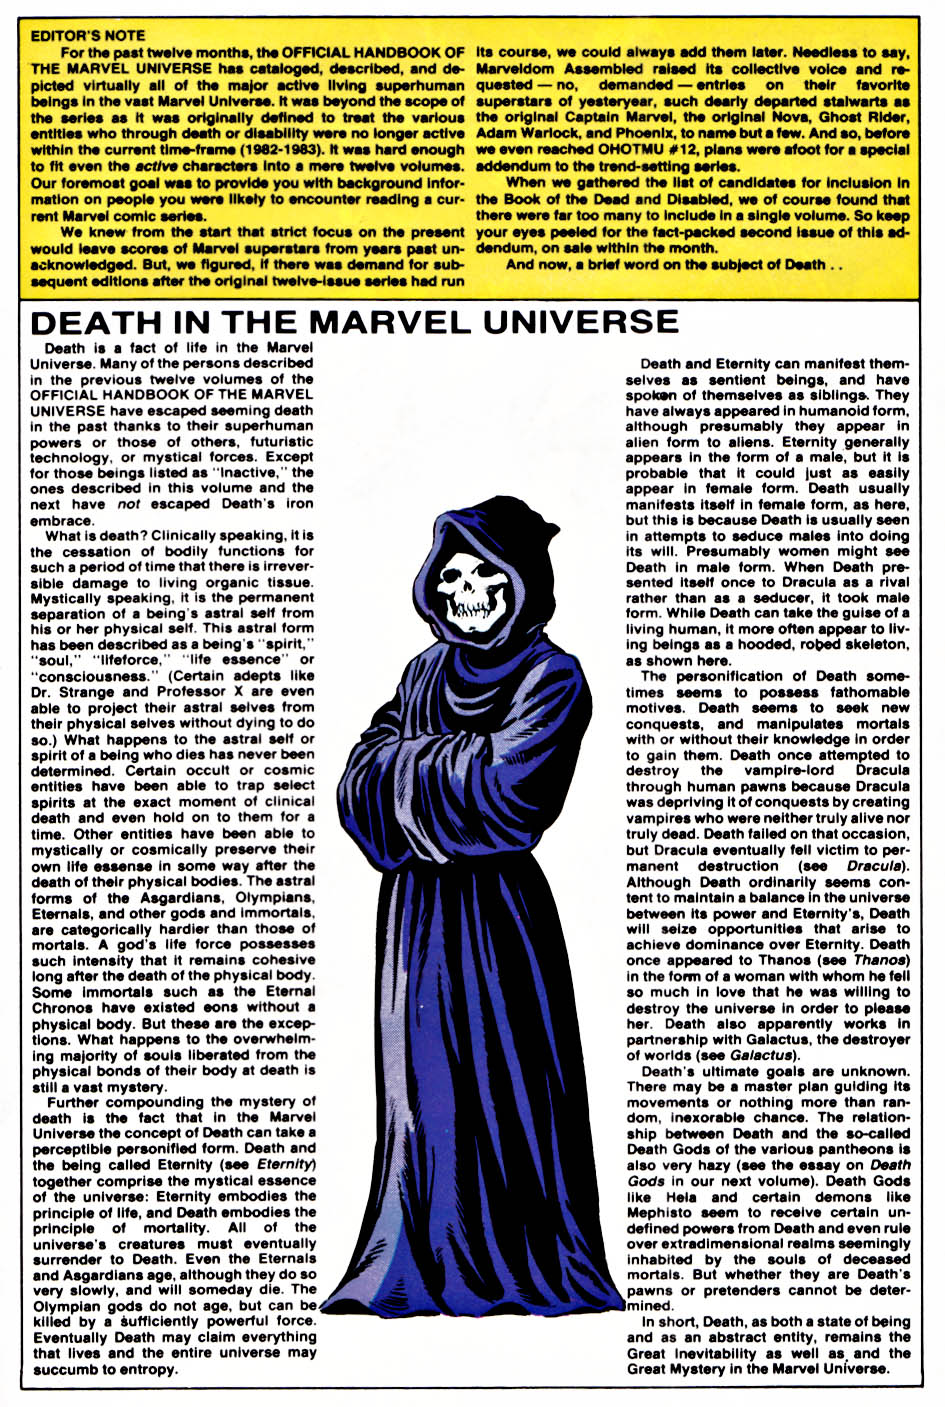 Read online The Official Handbook of the Marvel Universe comic -  Issue #13 - 35